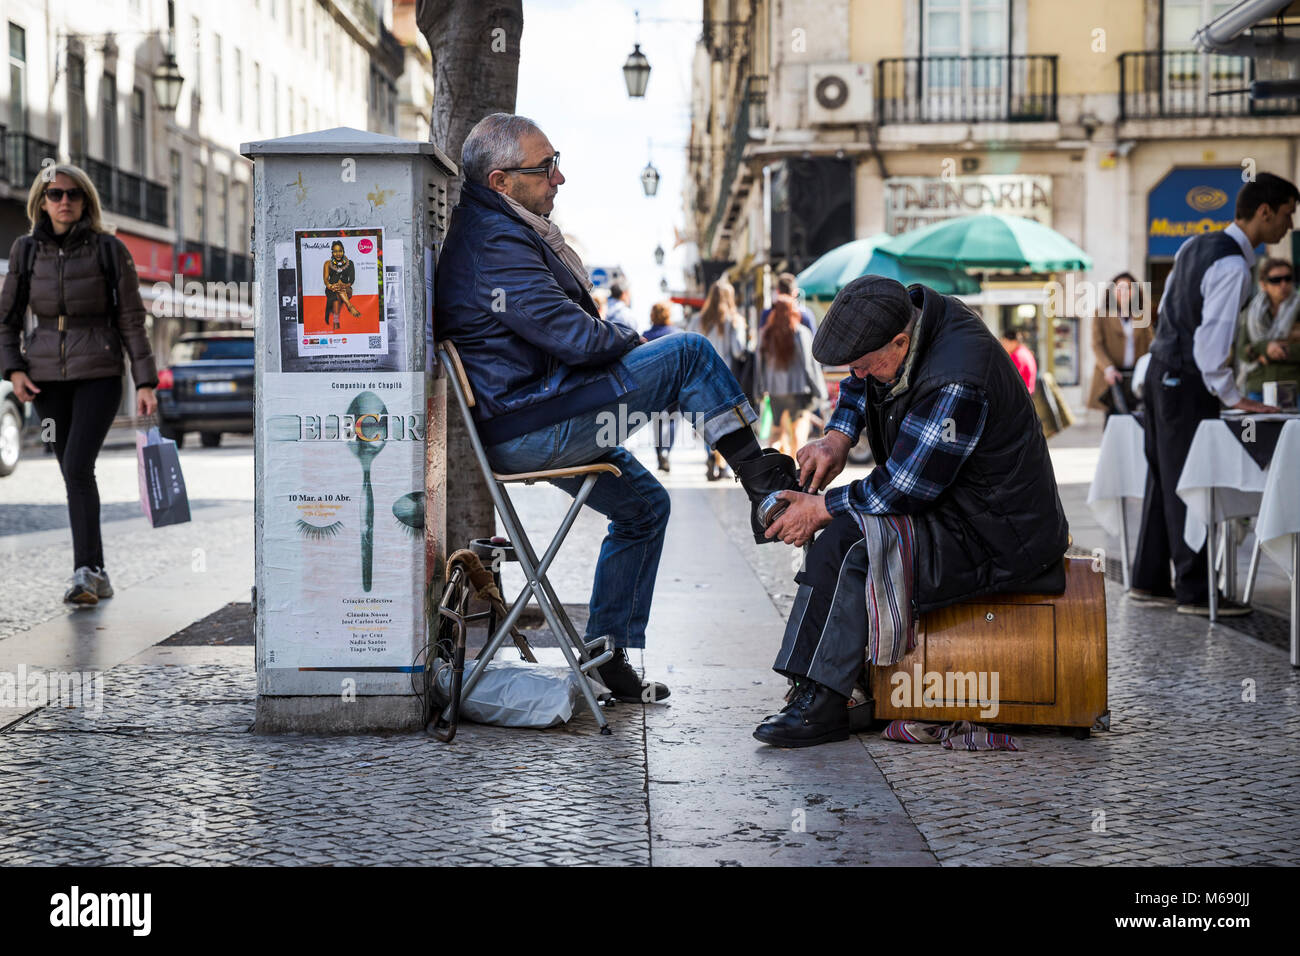 A man has his shoes shined on the street in Lisbon, Portugal. Stock Photo